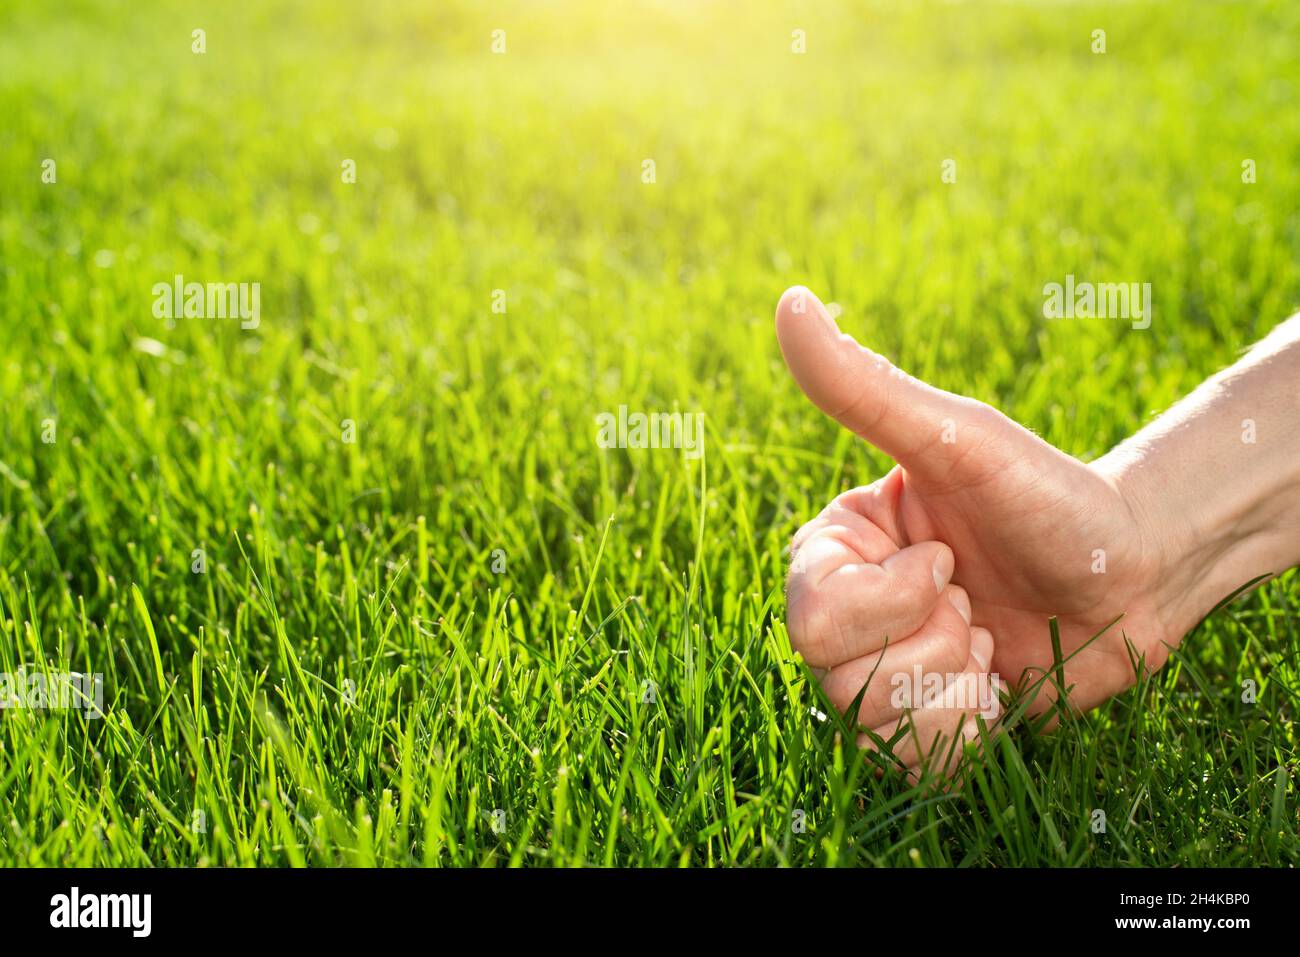 Thumb up gesture on grass lawn background. Stock Photo